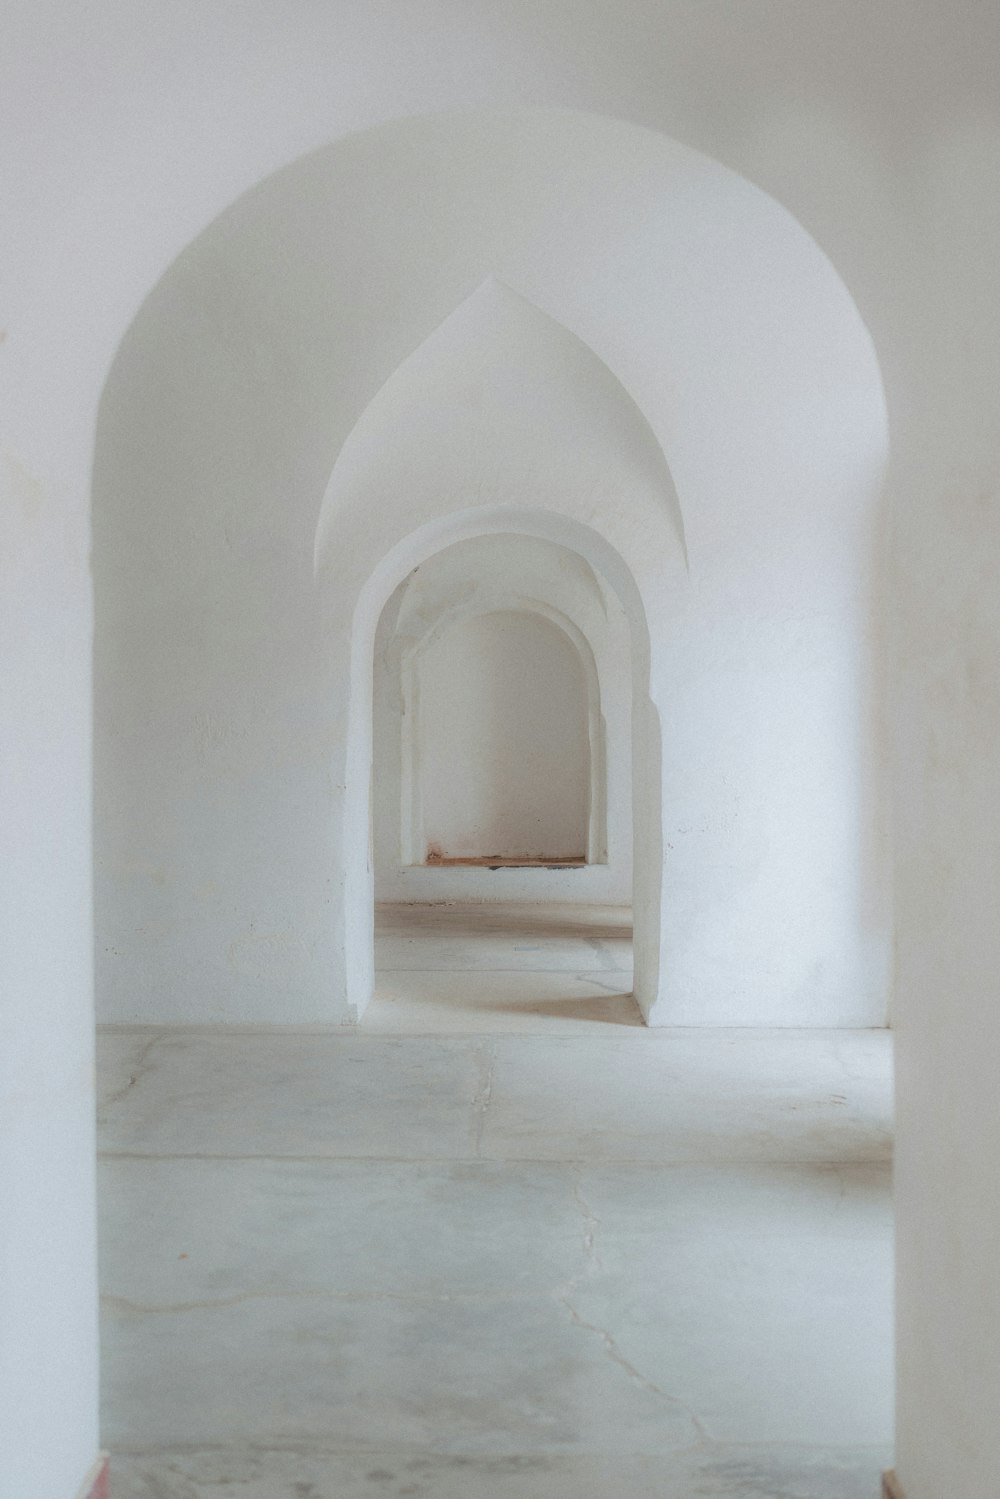 an empty room with a white wall and arches